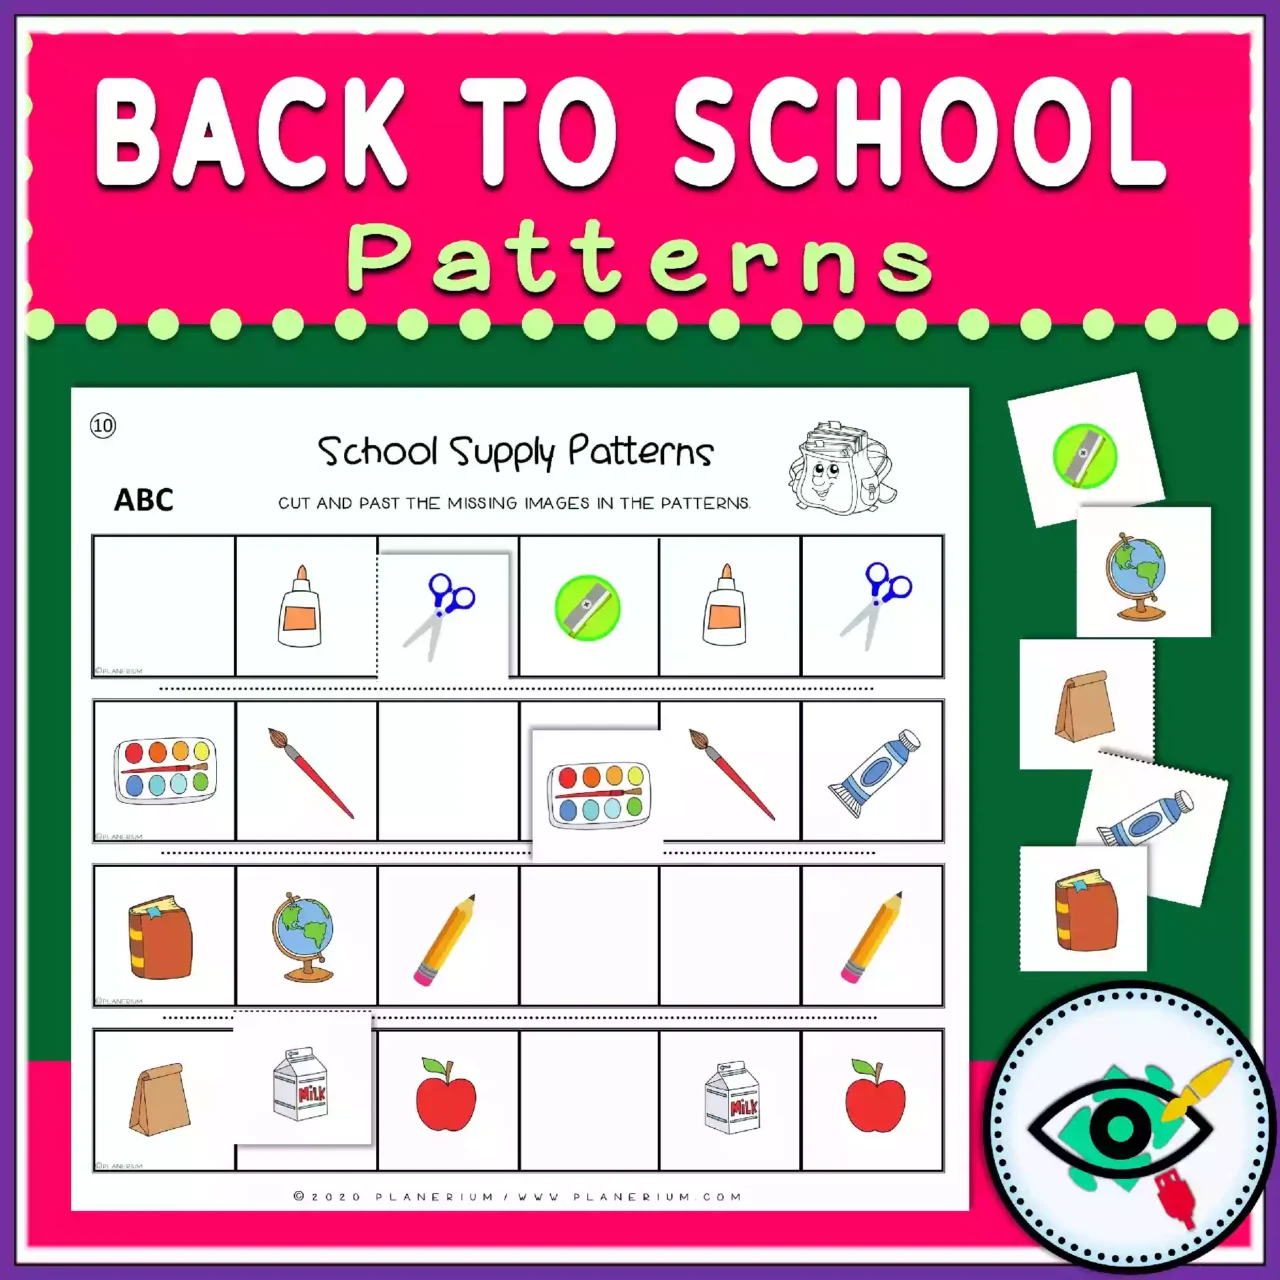 Back to School Patterns - Featured 7